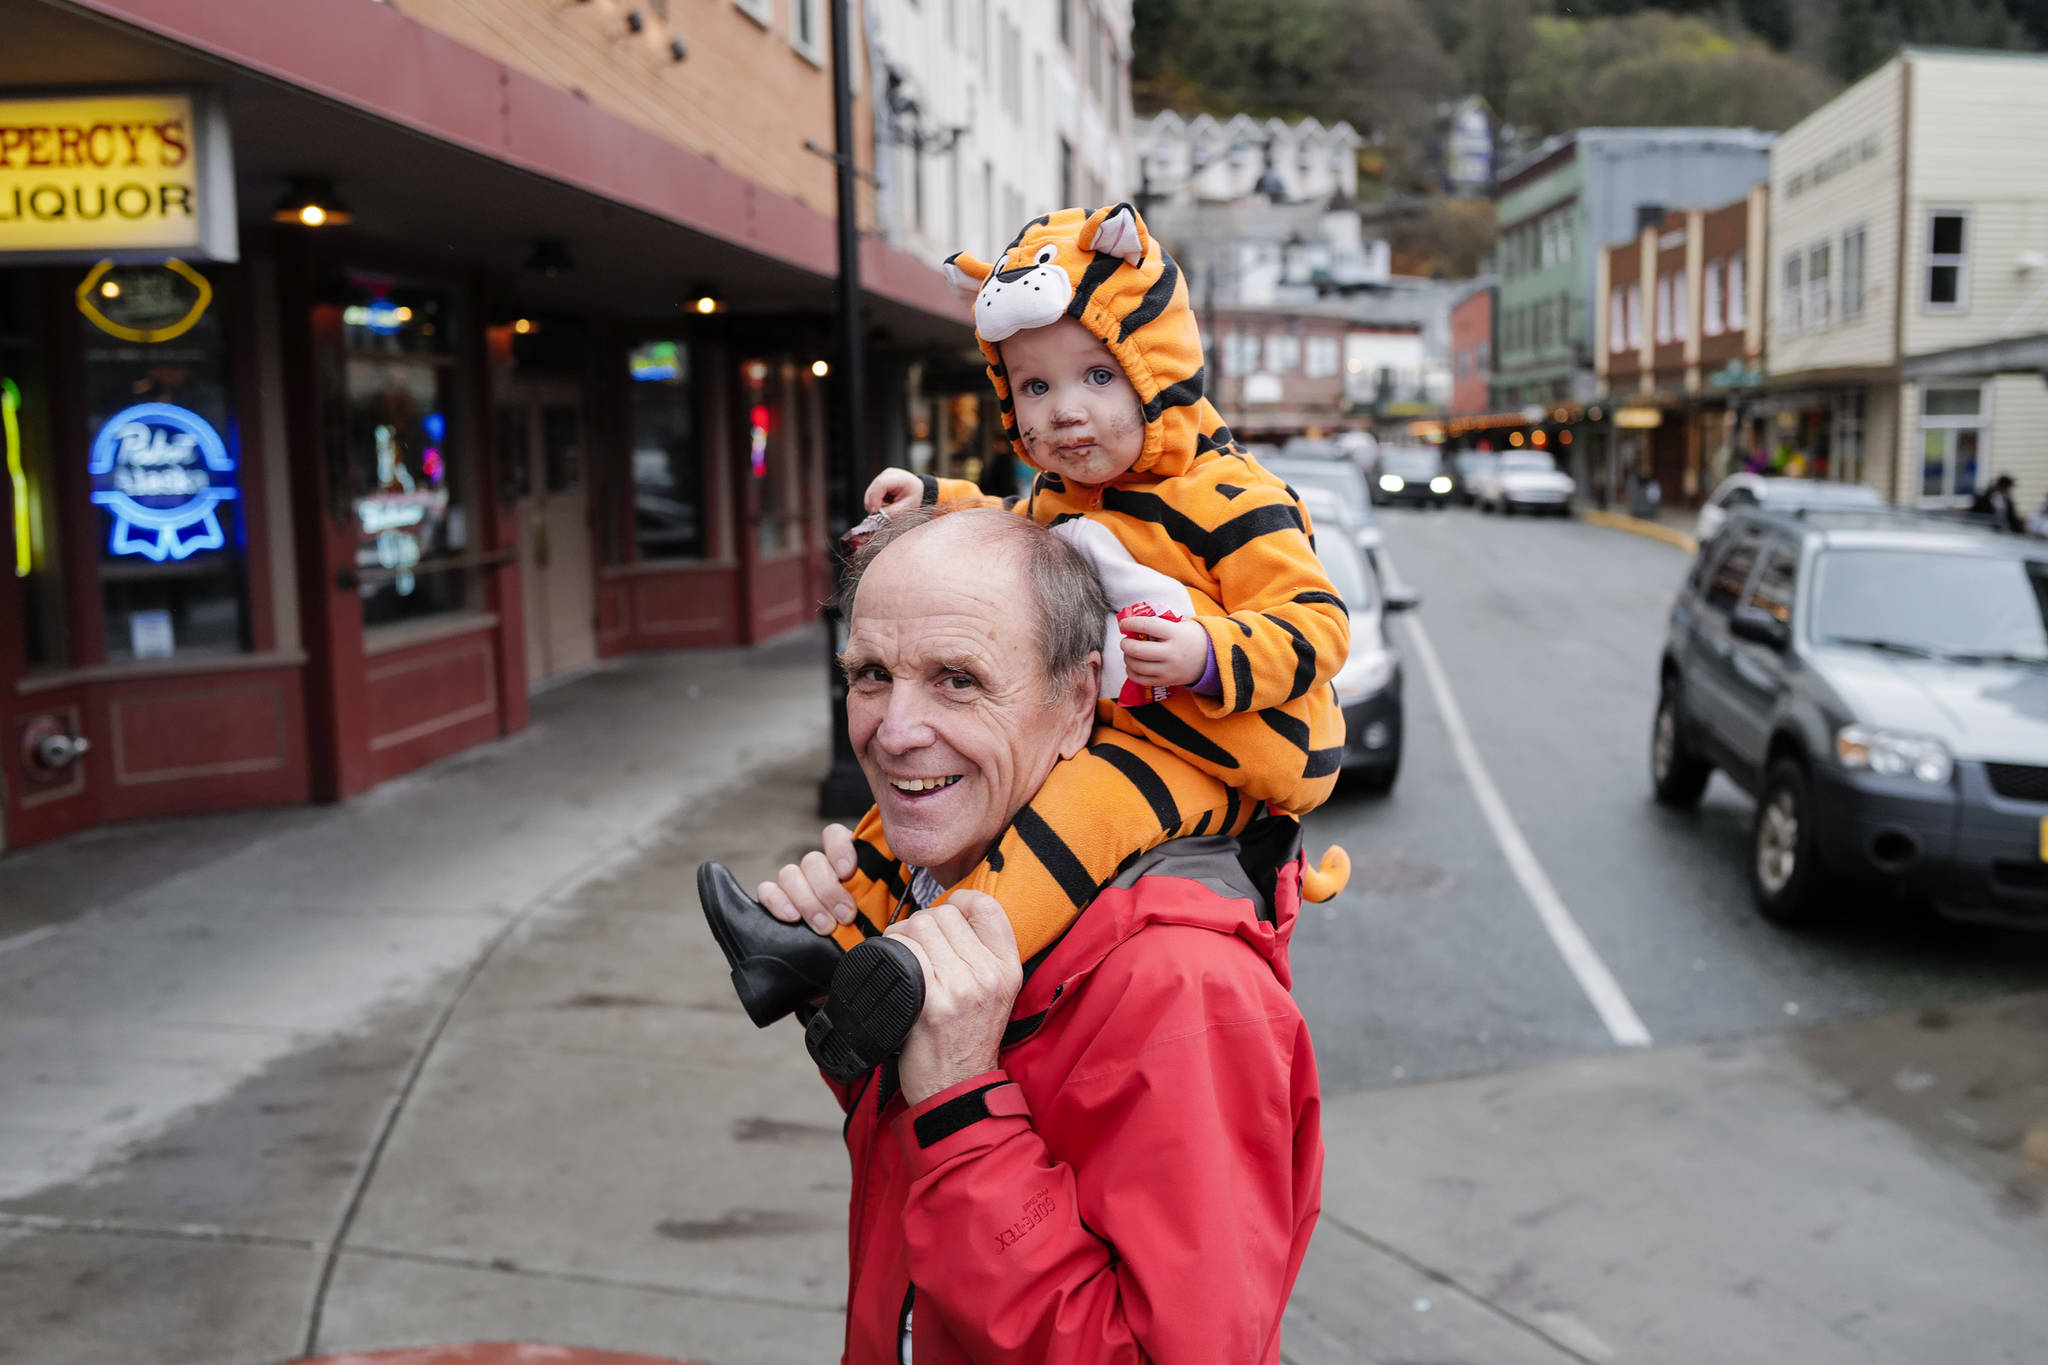 Bruce Denton carries his granddaughter, Hali Hall, 1, during the Trick or Treat Downtown event on Thursday, Oct. 31, 2019. More than 70 business put out orange balloons to participate in the event aimed at young children. (Michael Penn | Juneau Empire)